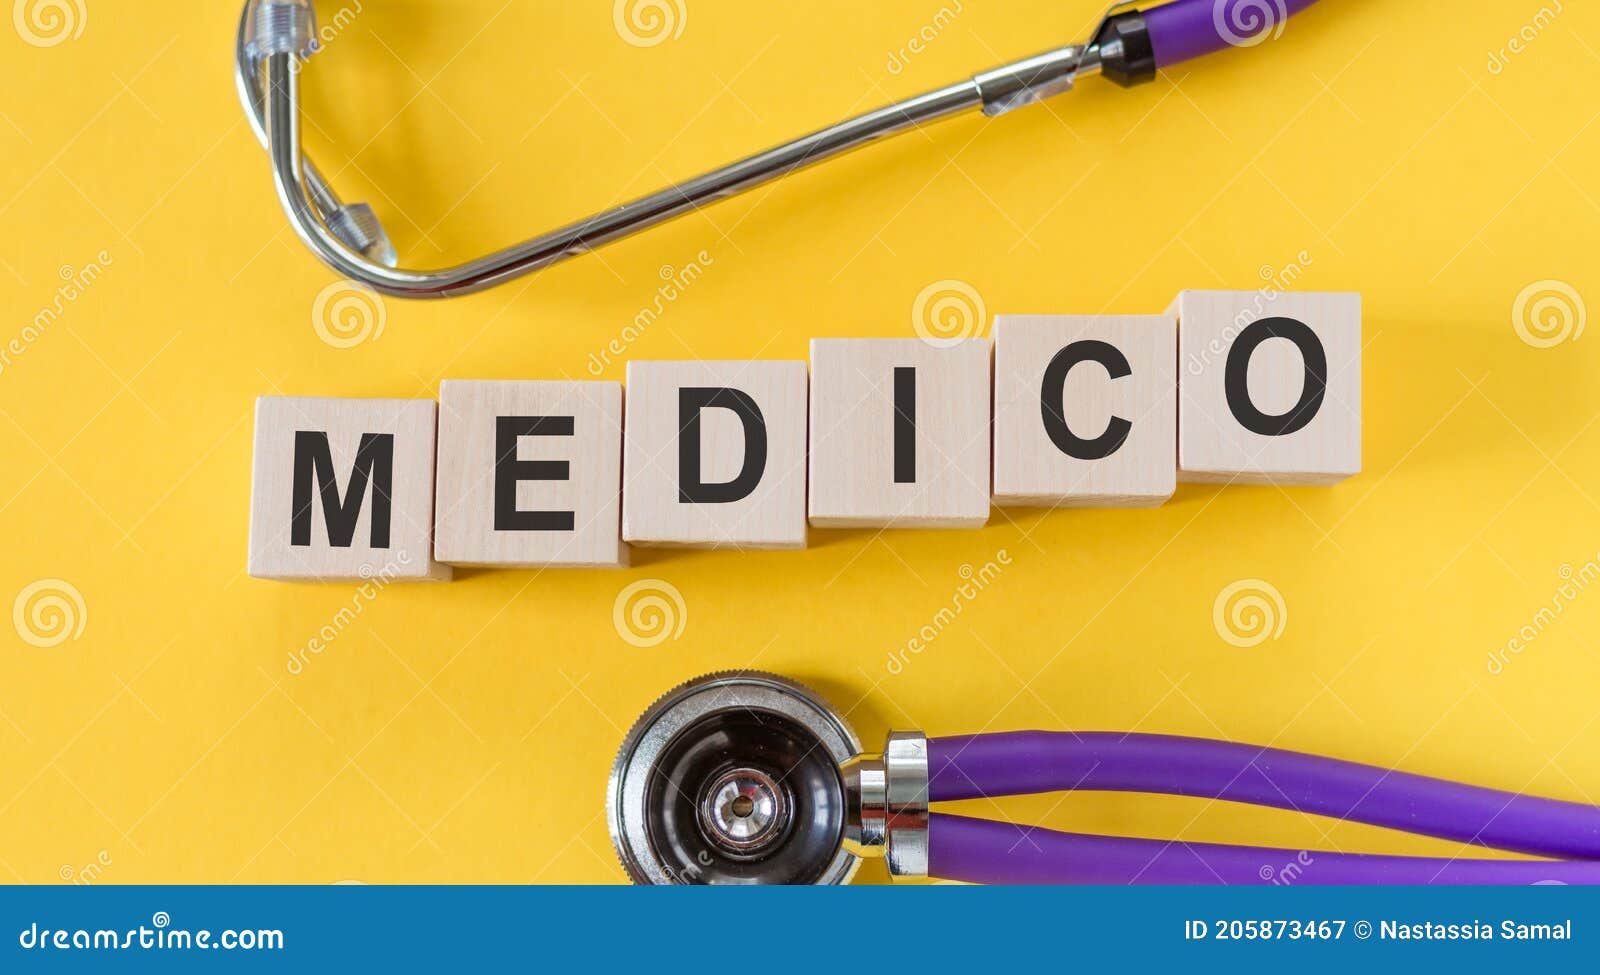 medico text made in building wood blocks on yellow desk